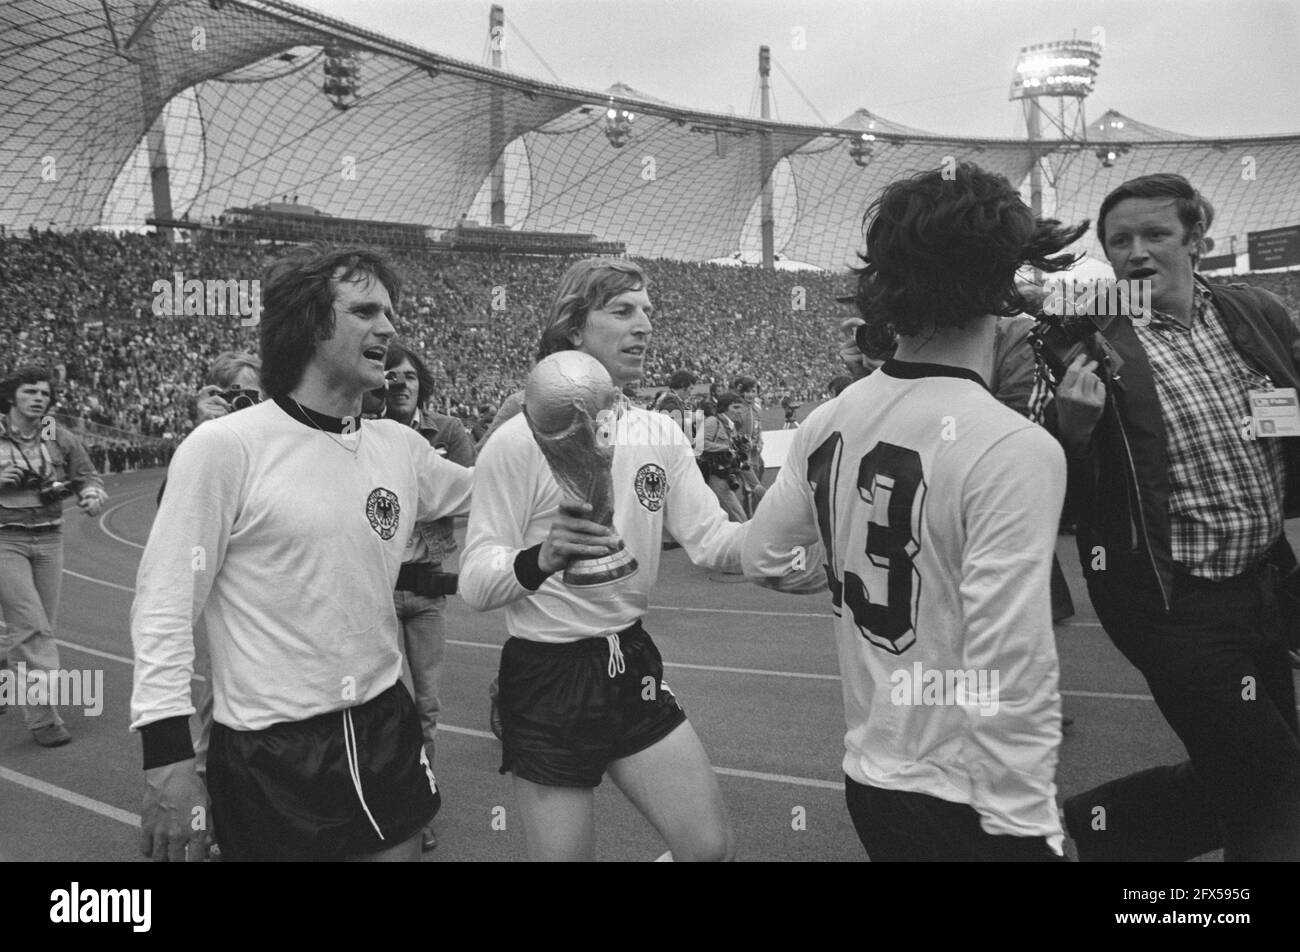 Final World Cup 1974 in Munich, West Germany v Netherlands 2-1; German players with the world cup, July 7, 1974, finals, sports, soccer, world championships, The Netherlands, 20th century press agency photo, news to remember, documentary, historic photography 1945-1990, visual stories, human history of the Twentieth Century, capturing moments in time Stock Photo